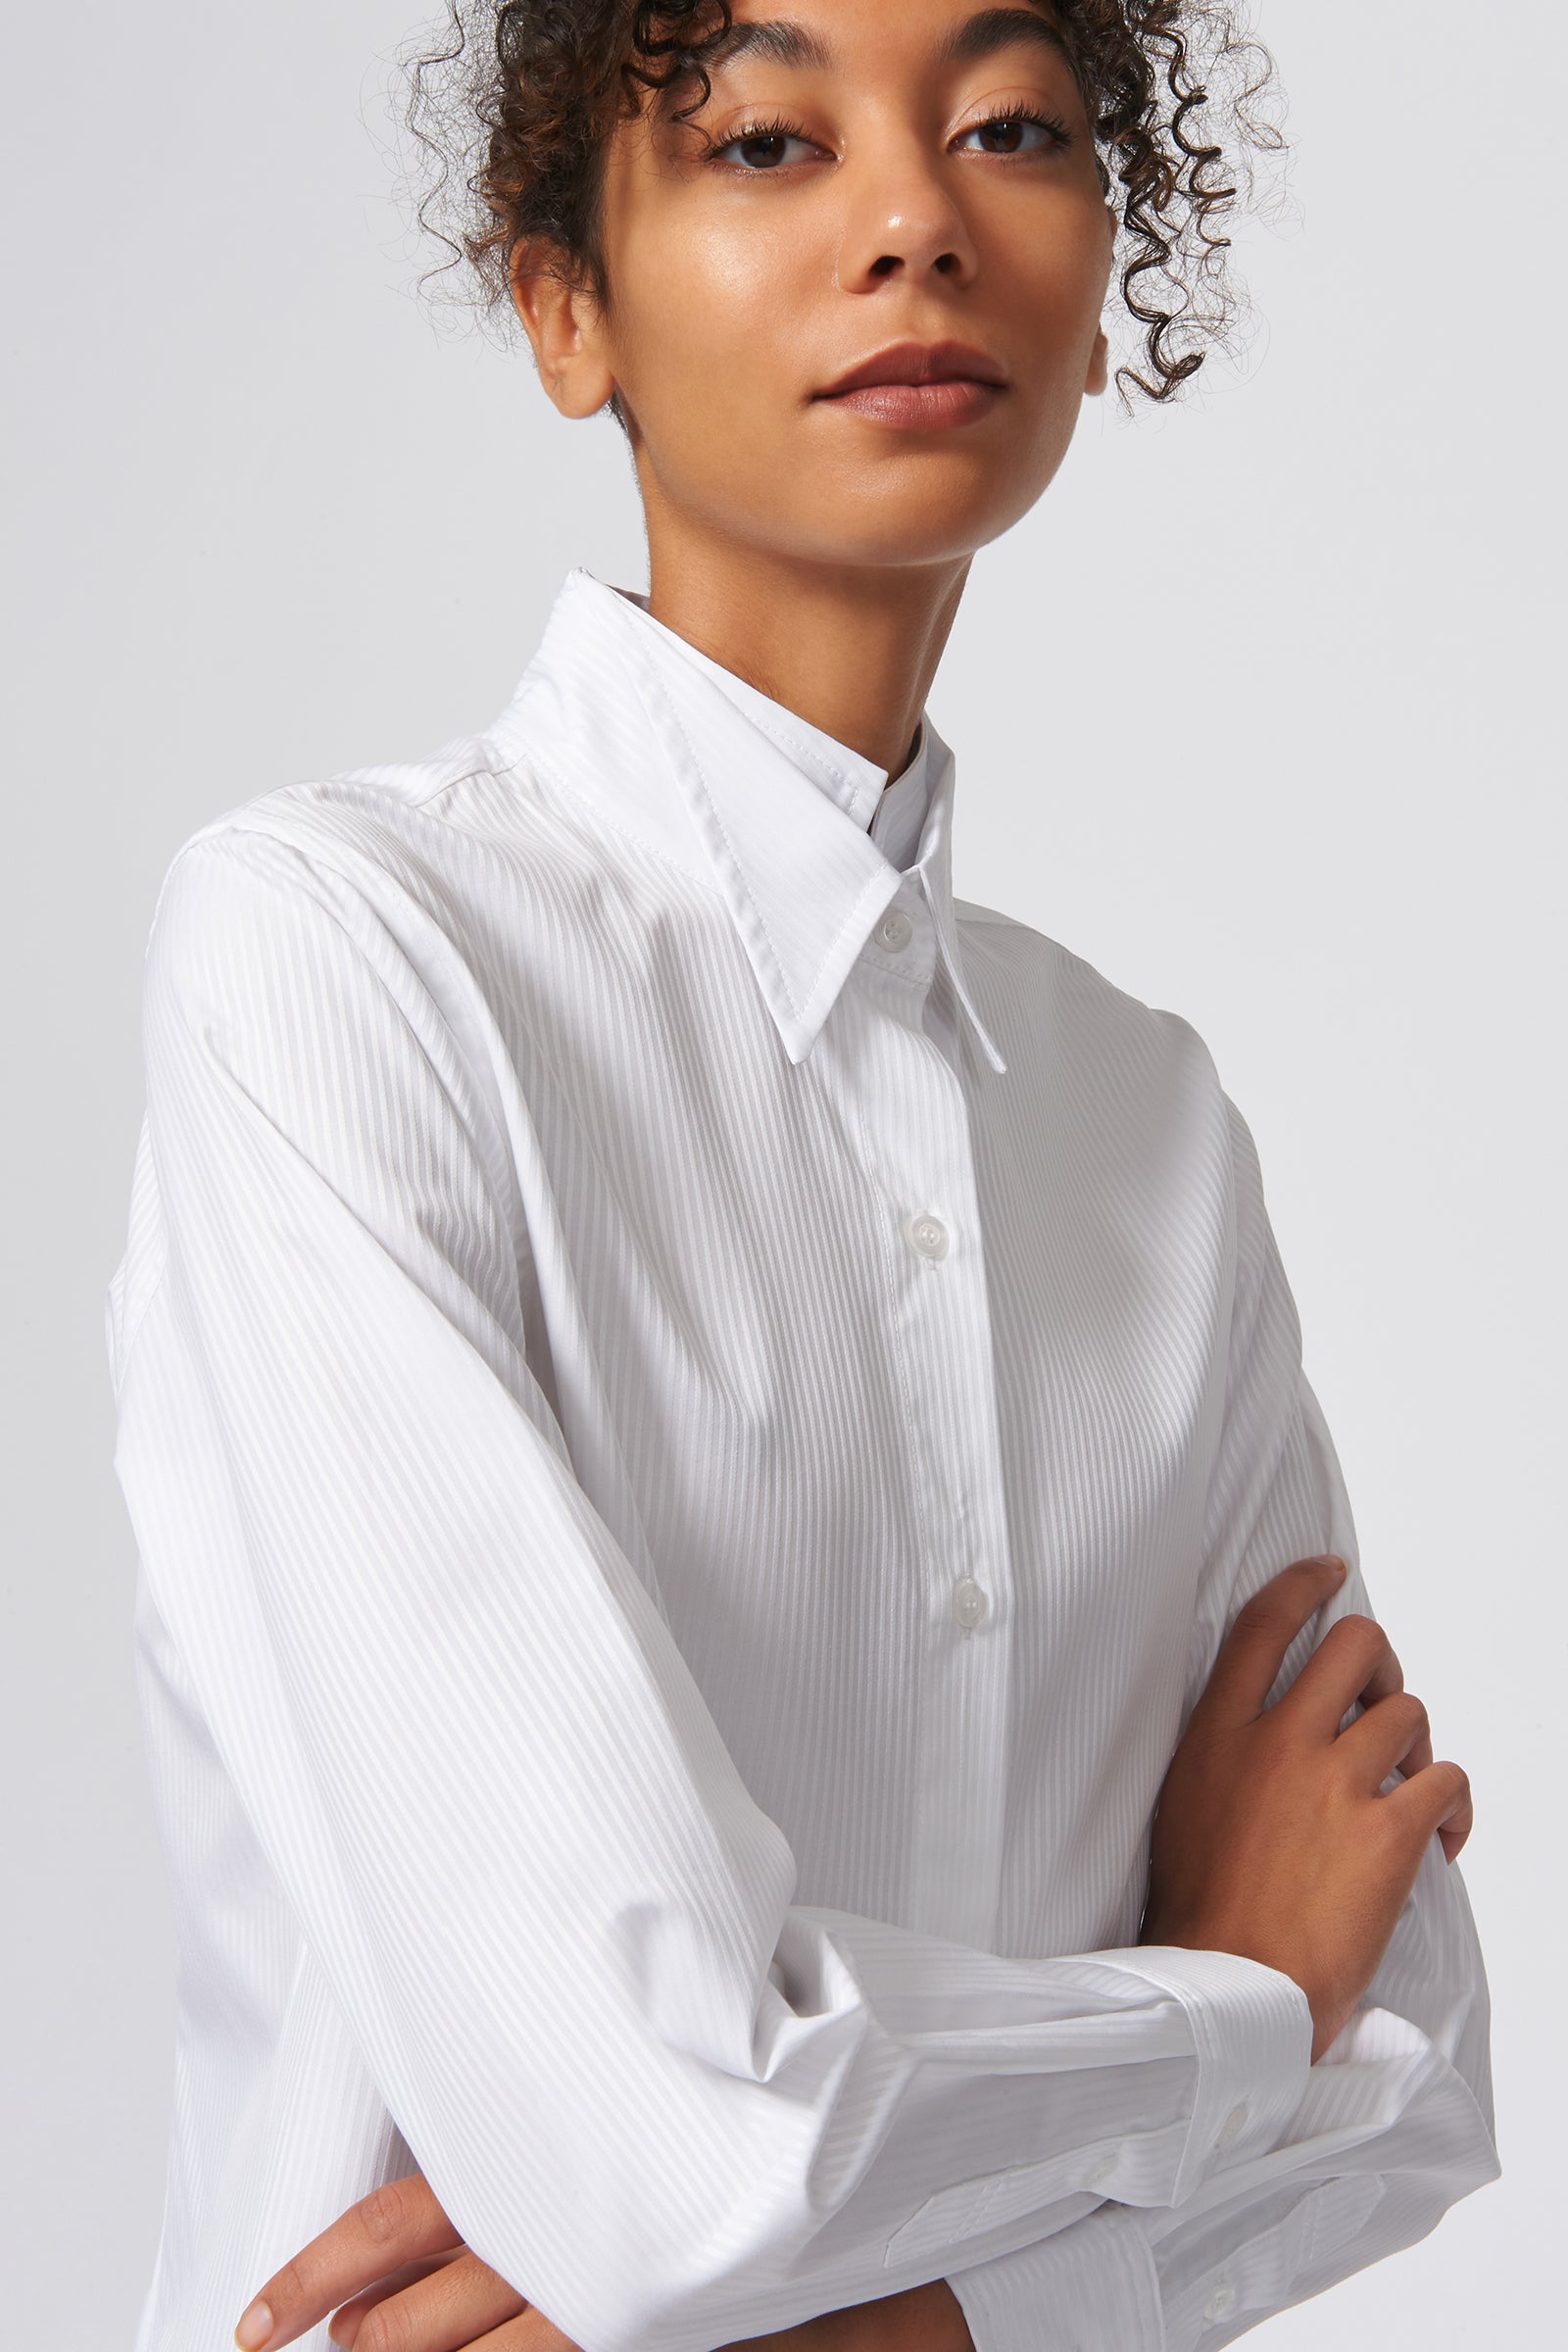 Kal Rieman Double Collar Shirt in White Satin Stripe on Model Close Up View